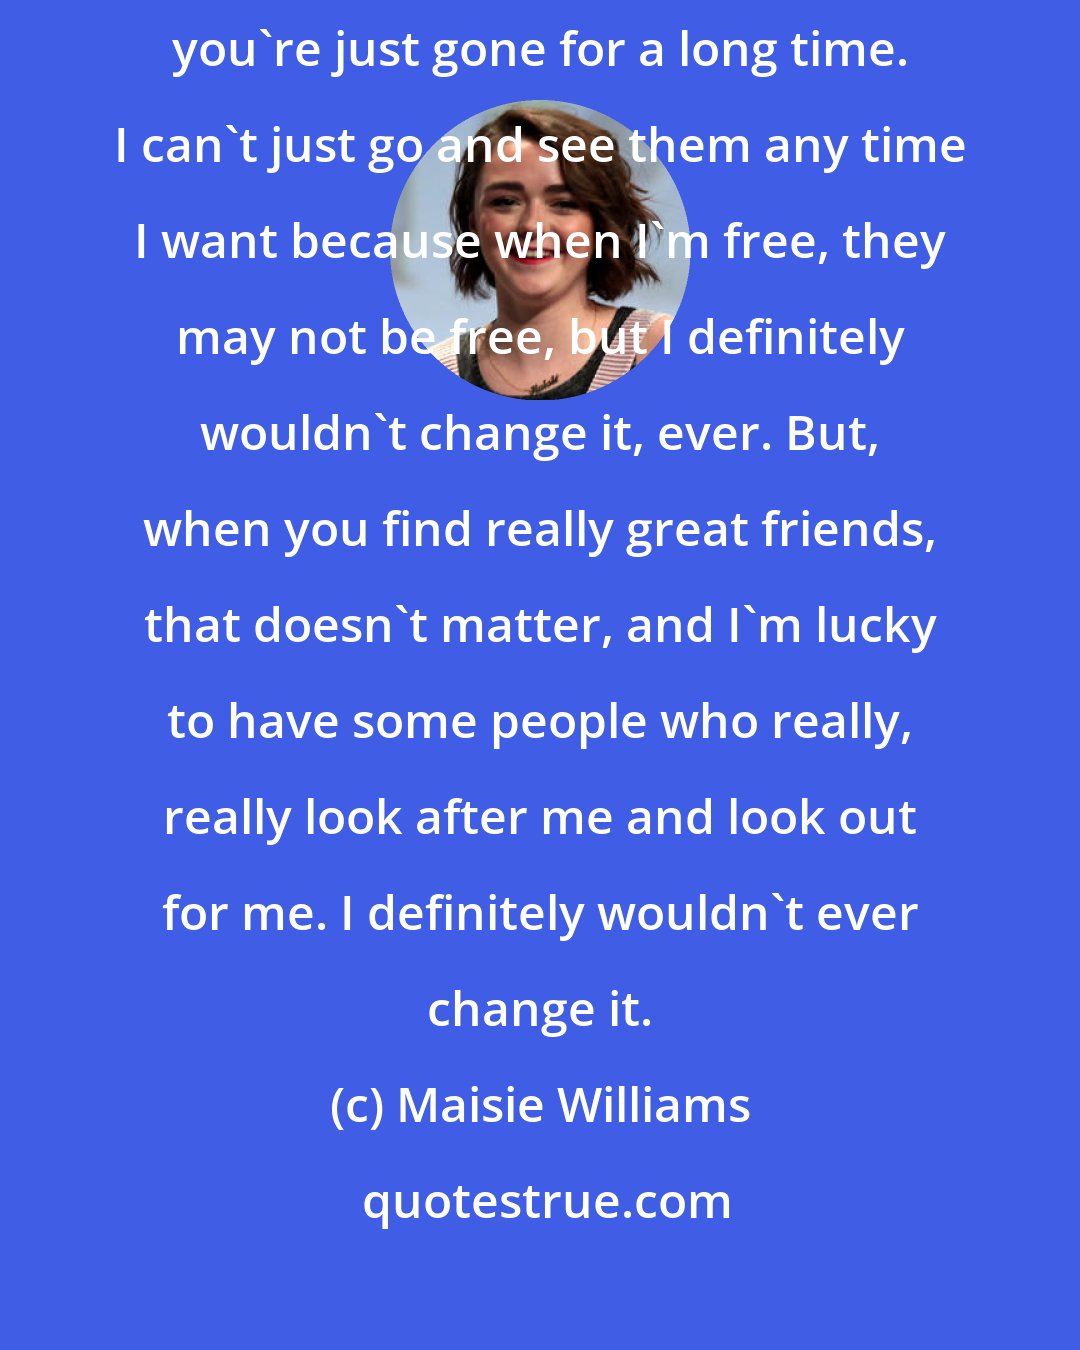 Maisie Williams: Sometimes you miss friends, and it's hard for them, as well, when you're just gone for a long time. I can't just go and see them any time I want because when I'm free, they may not be free, but I definitely wouldn't change it, ever. But, when you find really great friends, that doesn't matter, and I'm lucky to have some people who really, really look after me and look out for me. I definitely wouldn't ever change it.